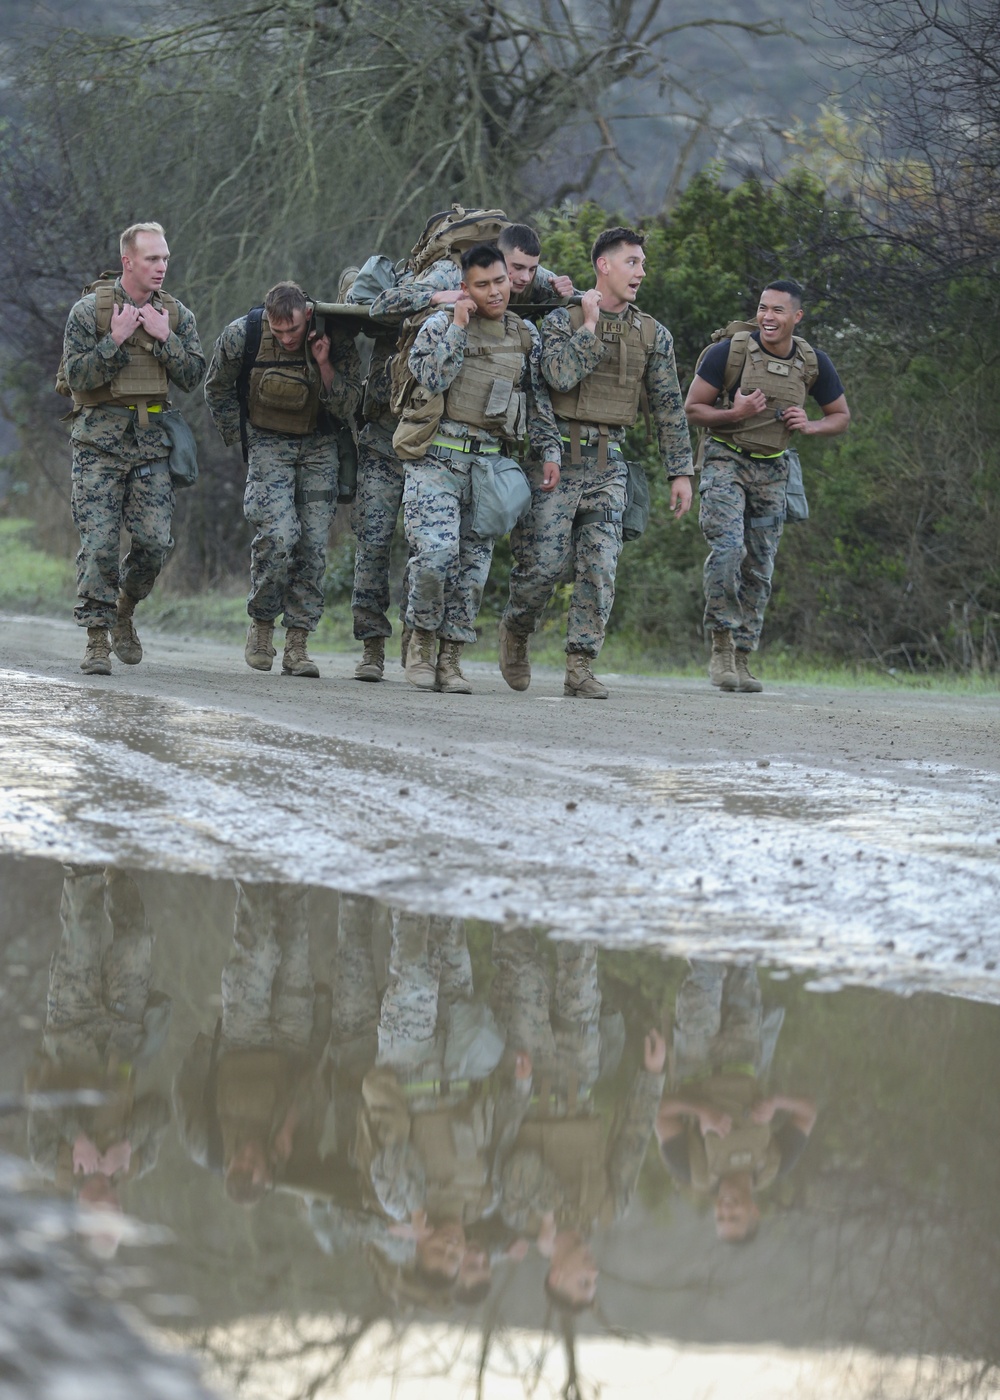 Corporals Course Marines experience nature of war